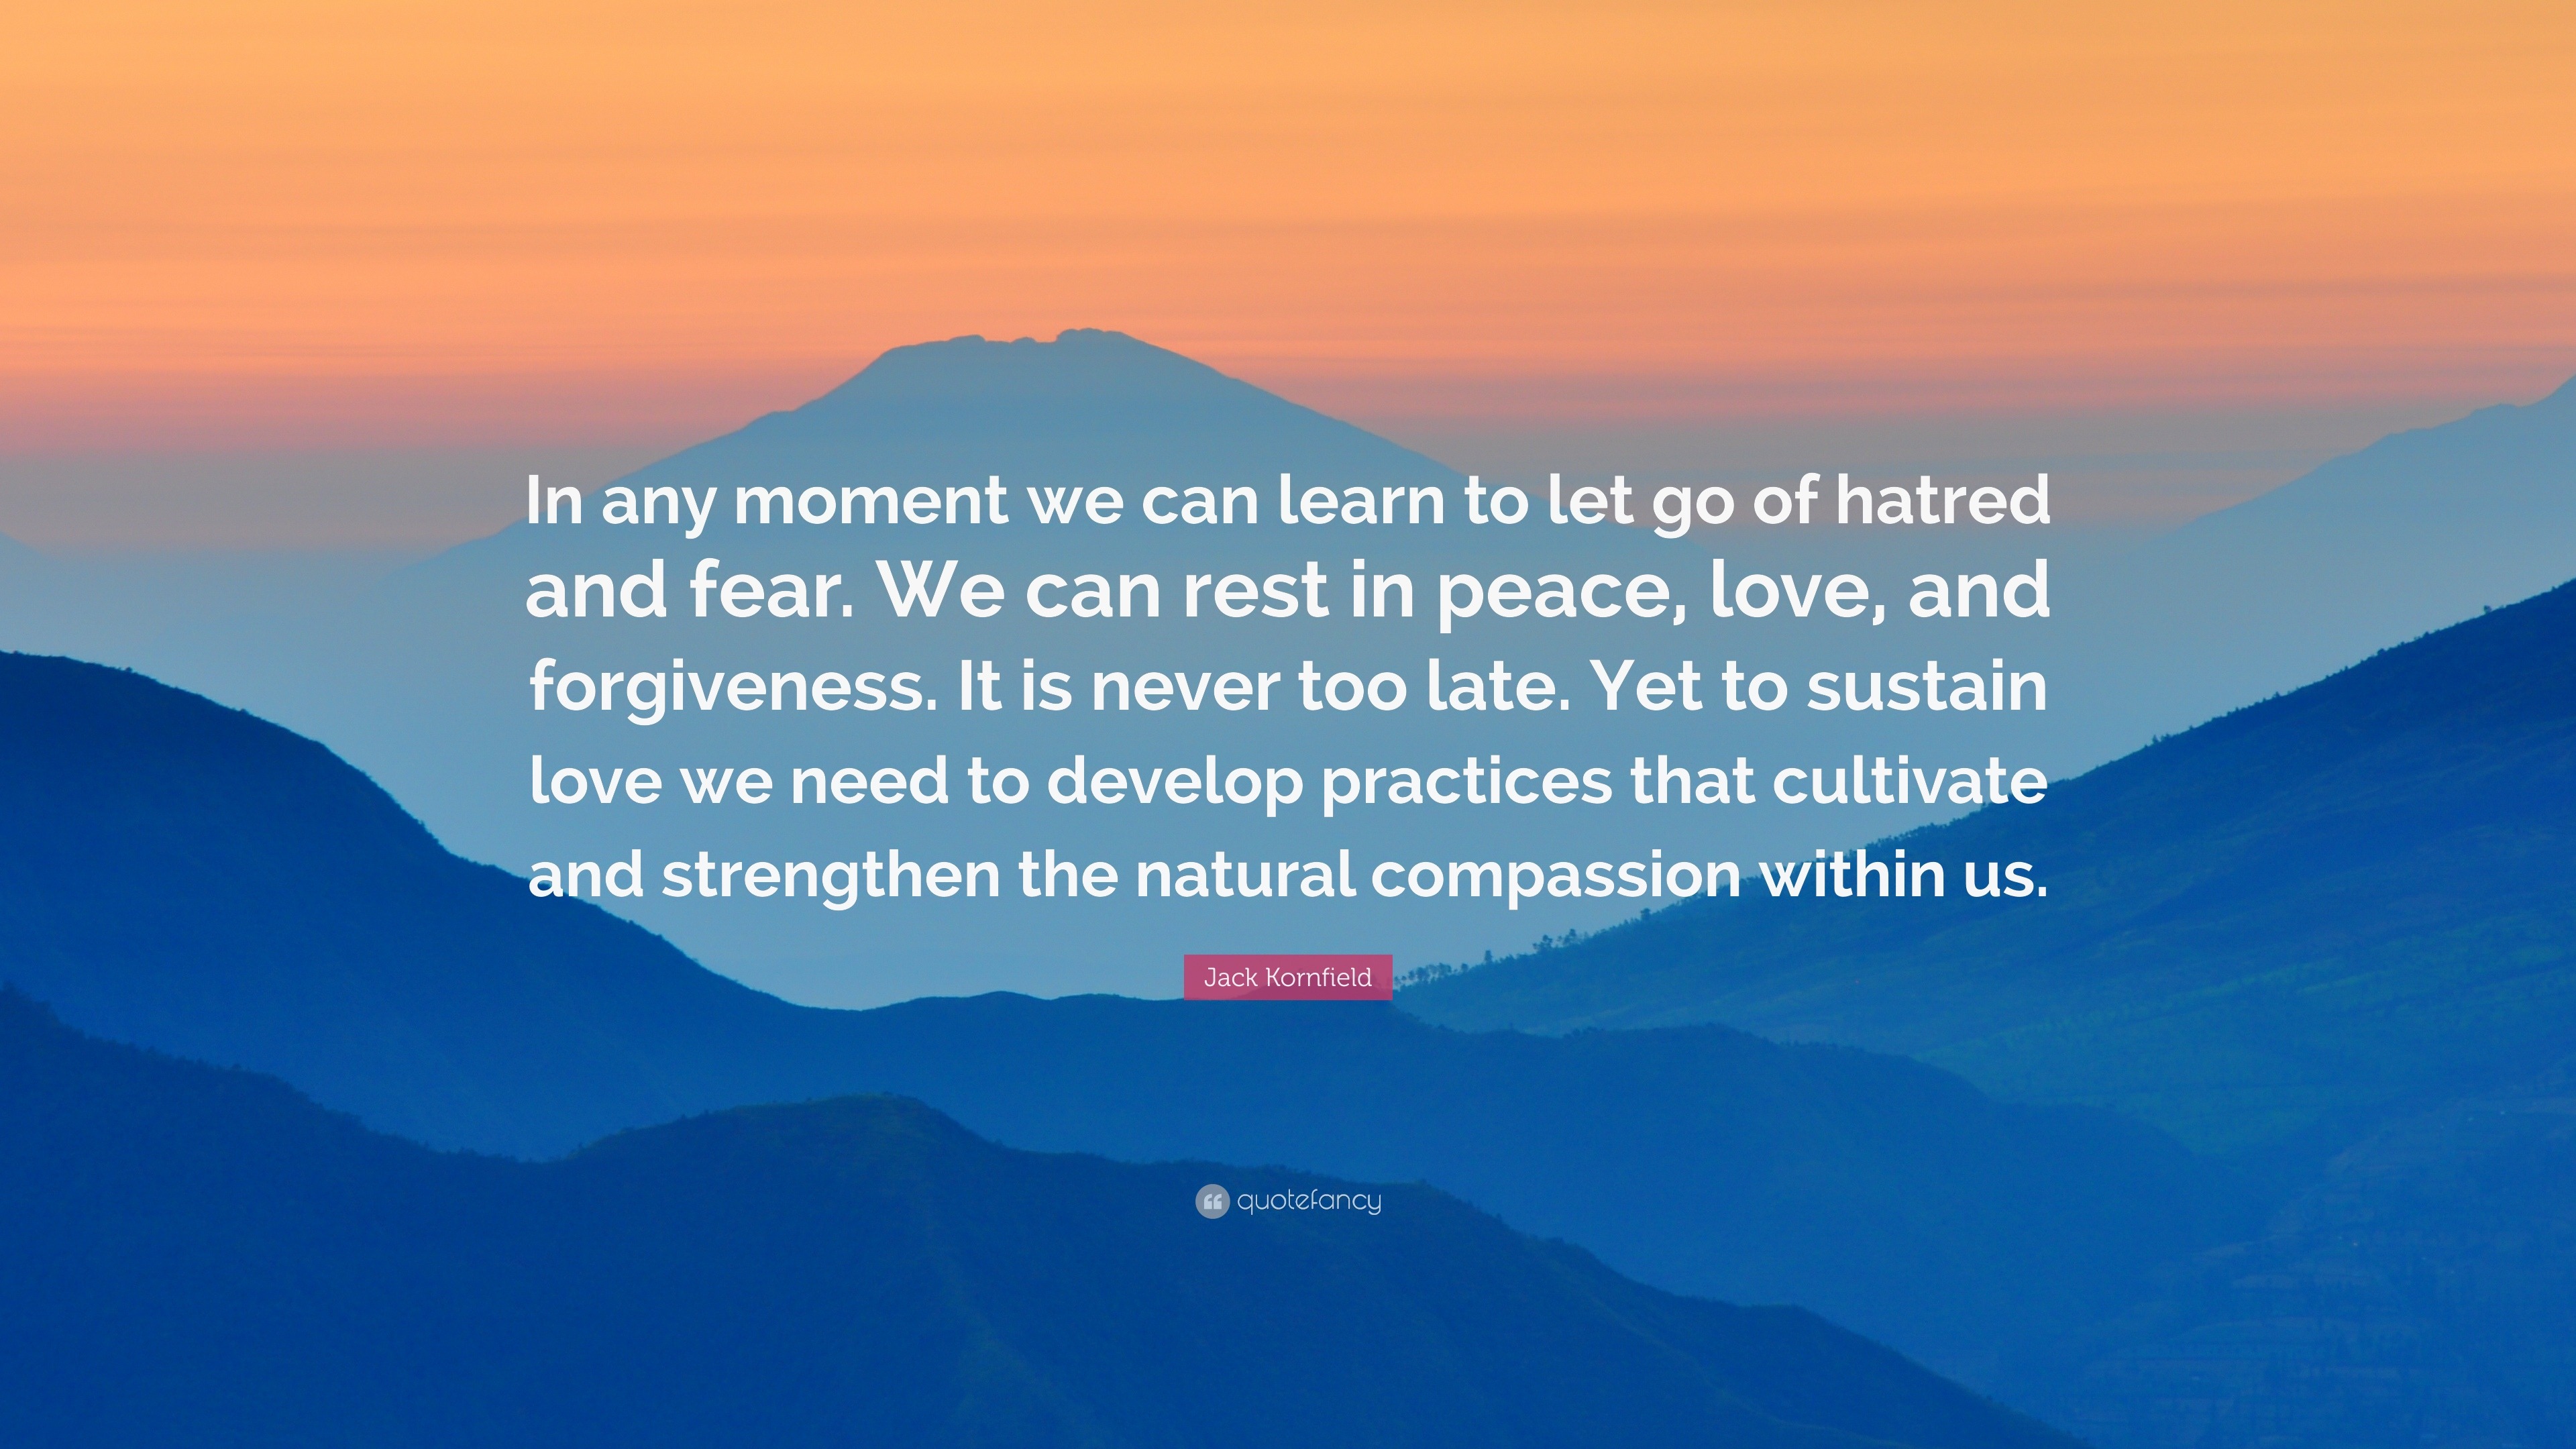 Jack Kornfield Quote “In any moment we can learn to let go of hatred